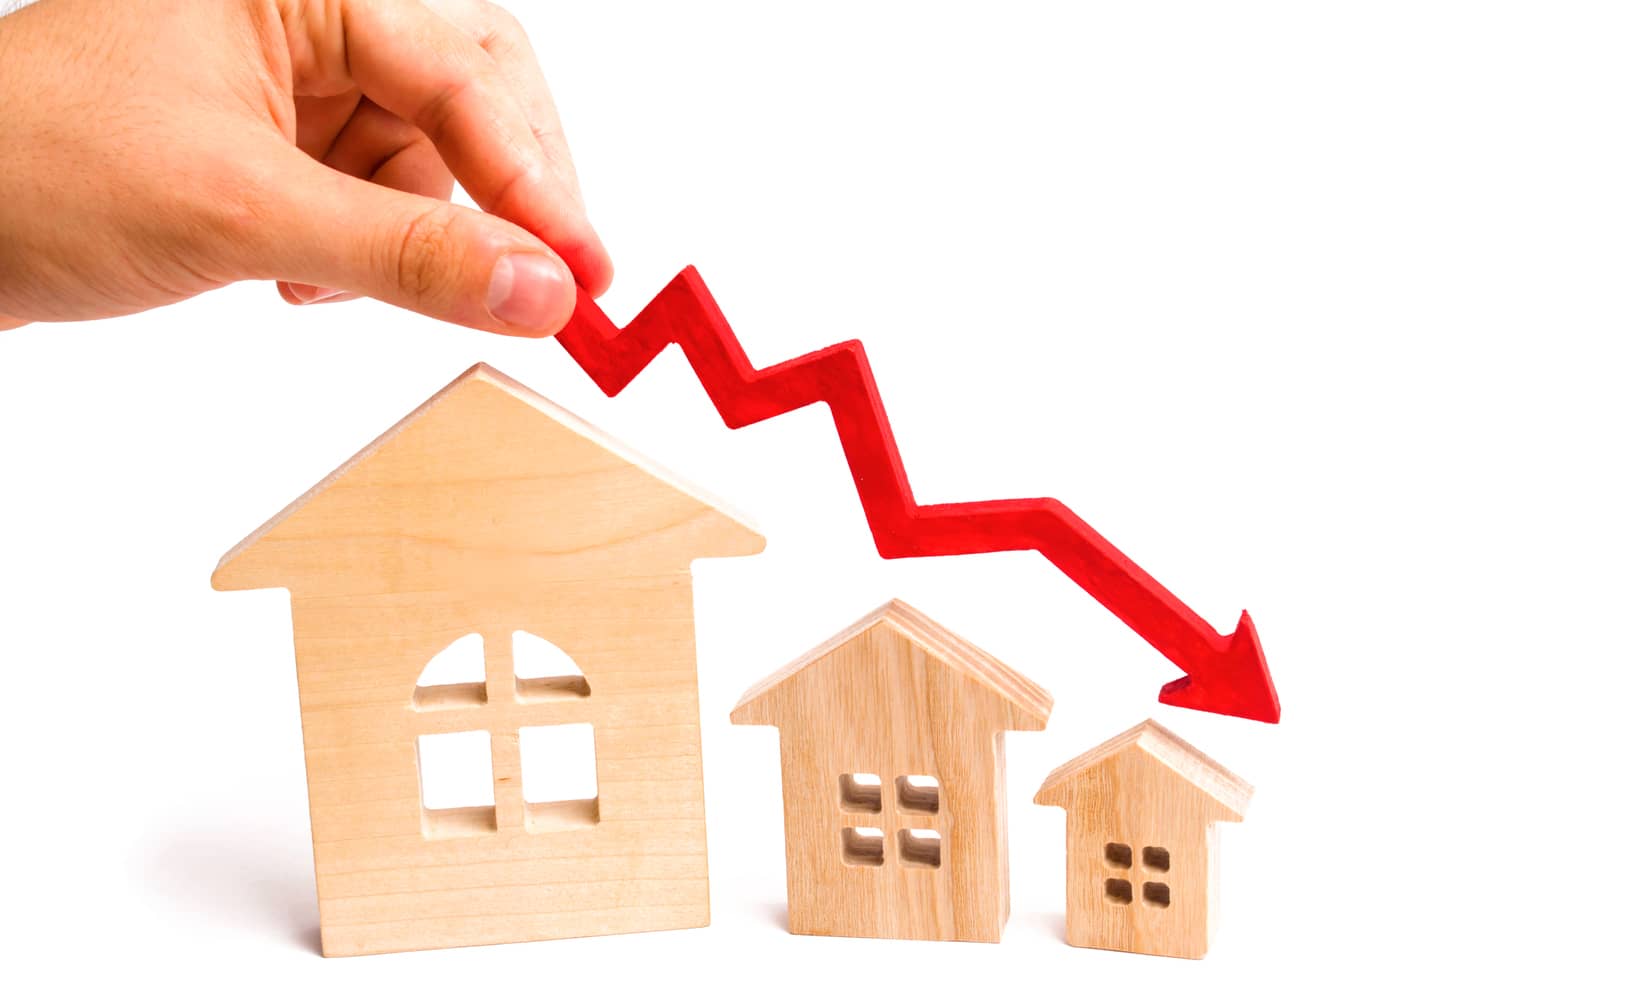 the-hand-holds-a-red-arrow-above-the-wooden-houses-down-the-houses-are-decreasing-the-concept-of-falling-demand-and-supply-in-the-real-estate-market-economic-crisis-the-fall-in-prices-4